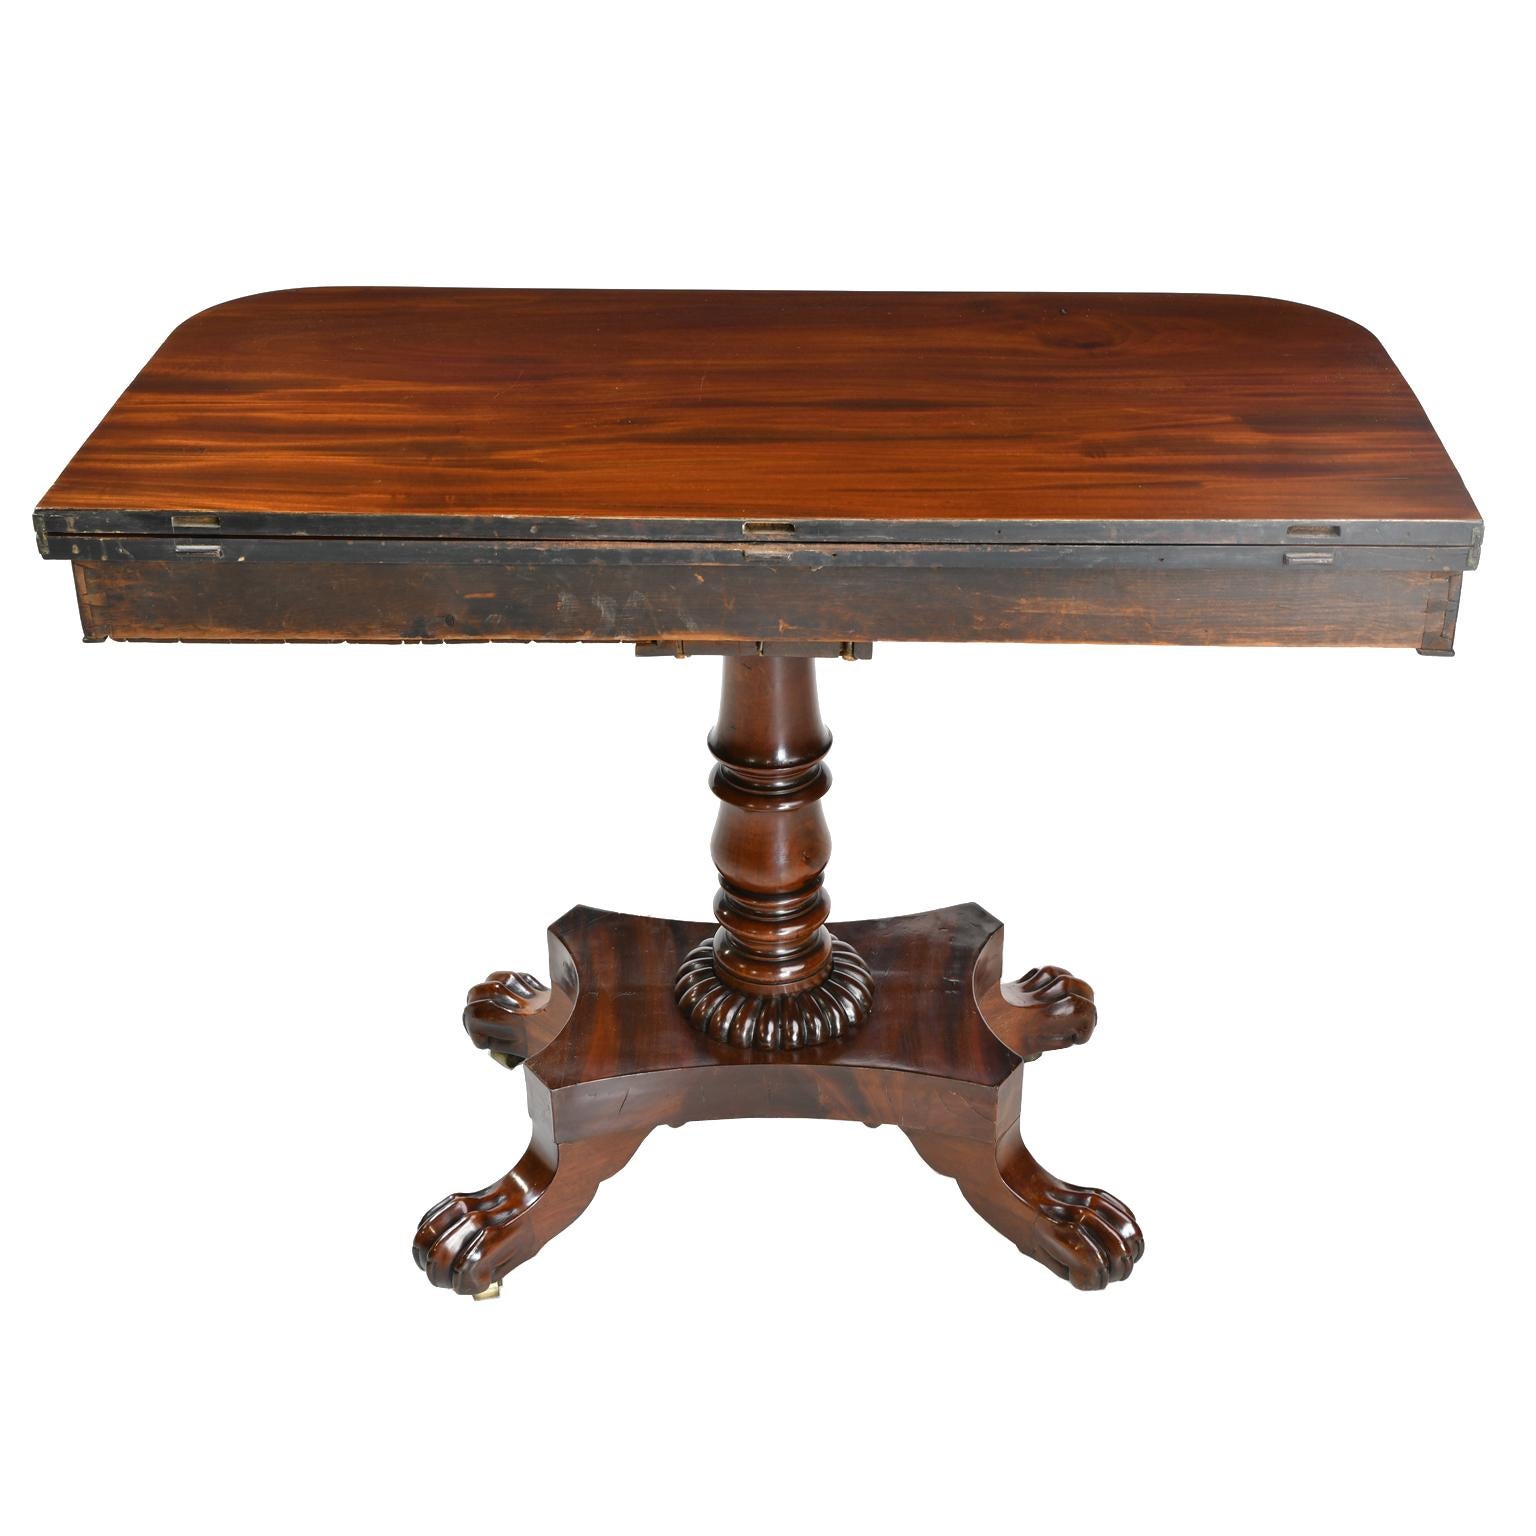 North American Antique American Empire Game/Card Table in West Indies Mahogany, circa 1830 For Sale